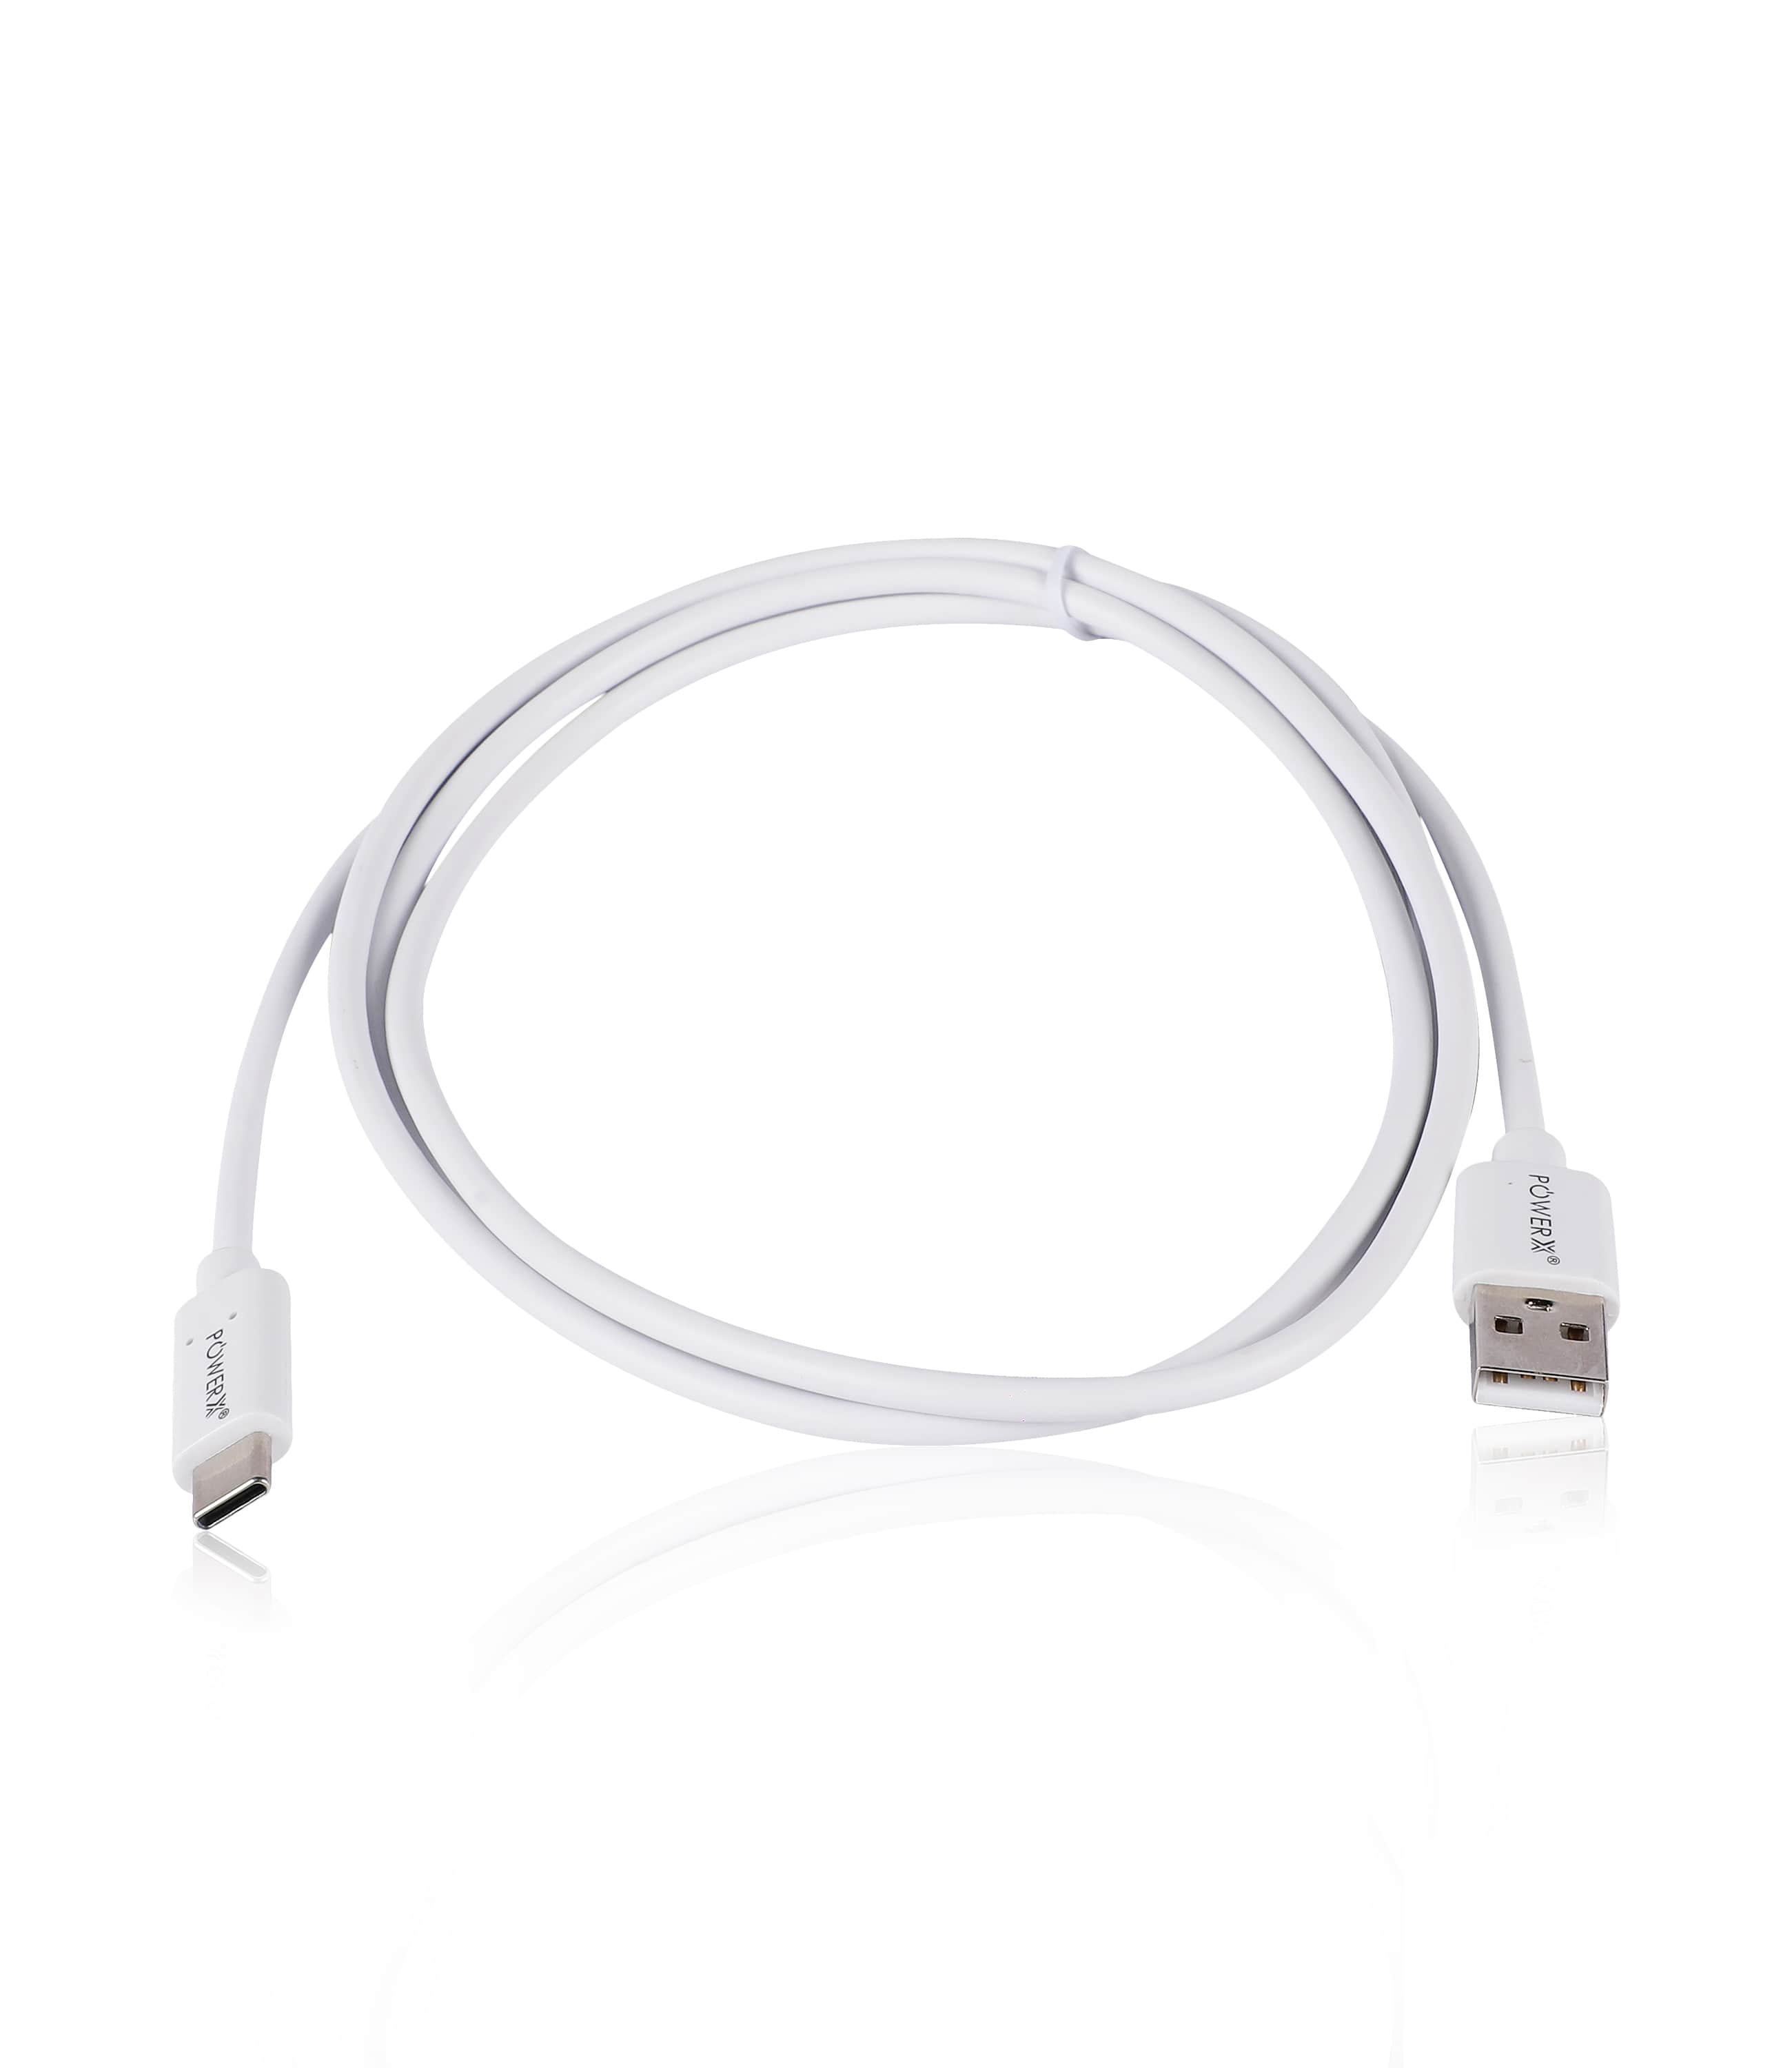 3A FAST CHARGING USB A TO C CABLE 1.5 METER